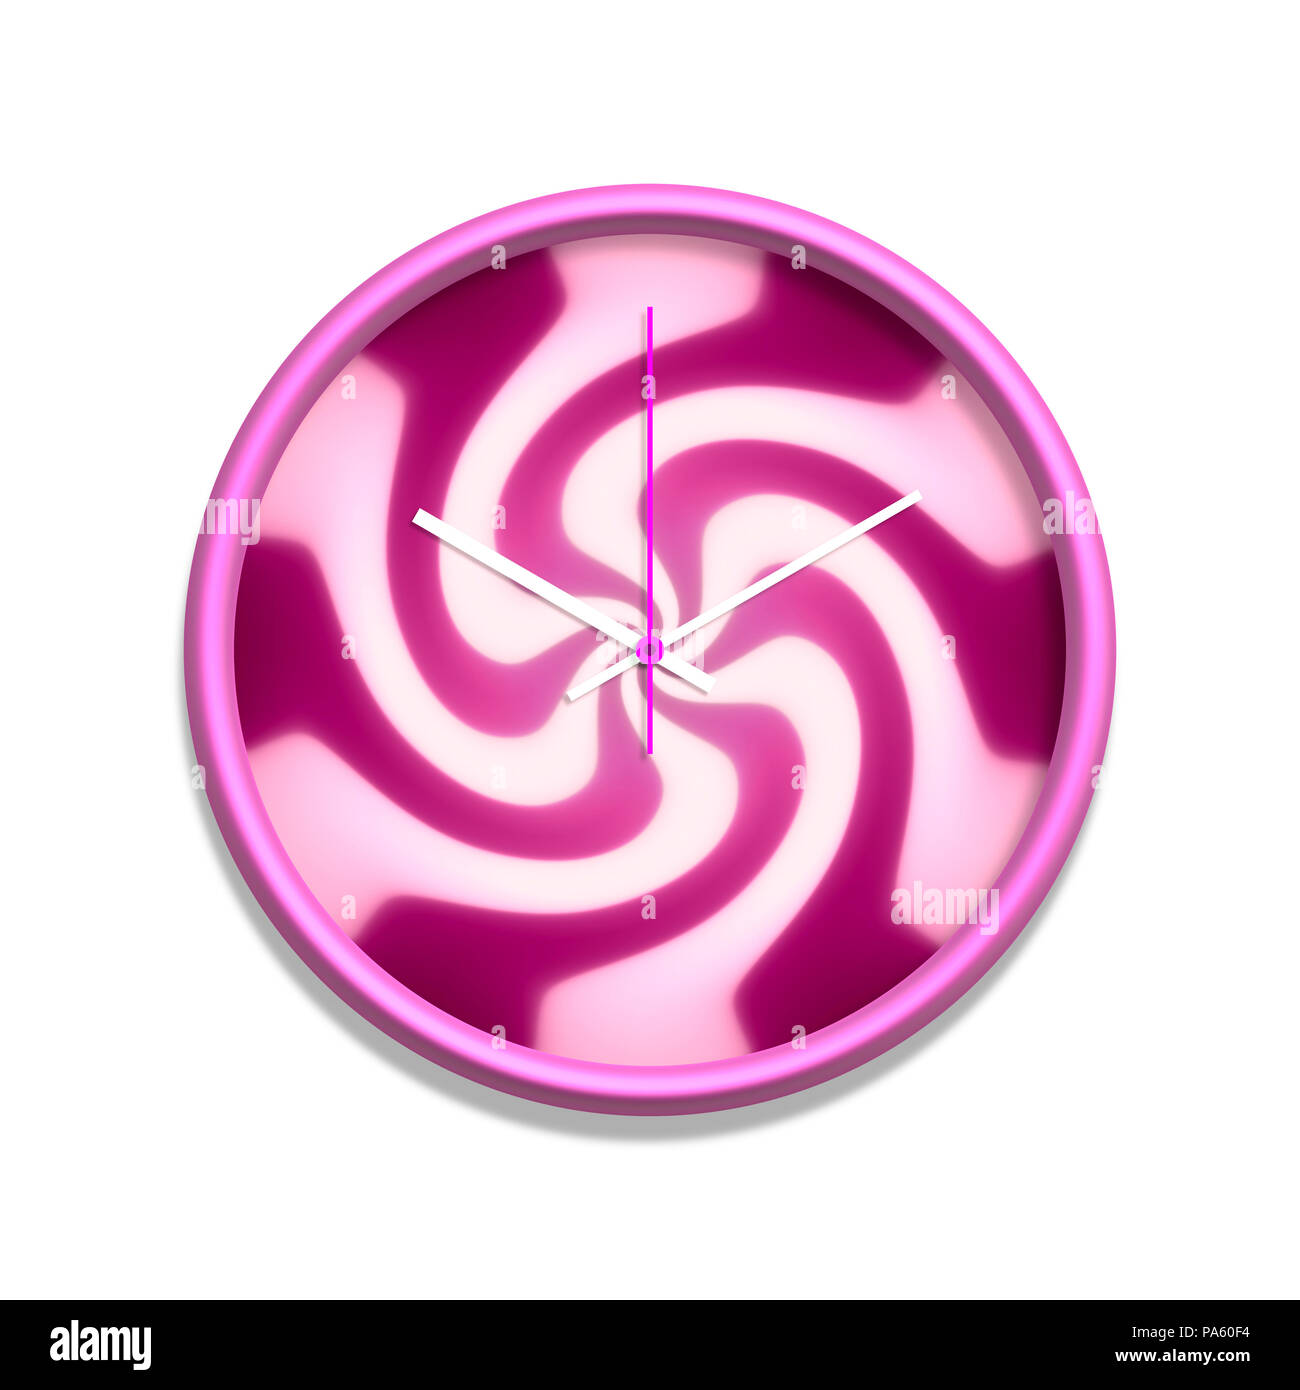 An illustration of a big pink clock Stock Photo